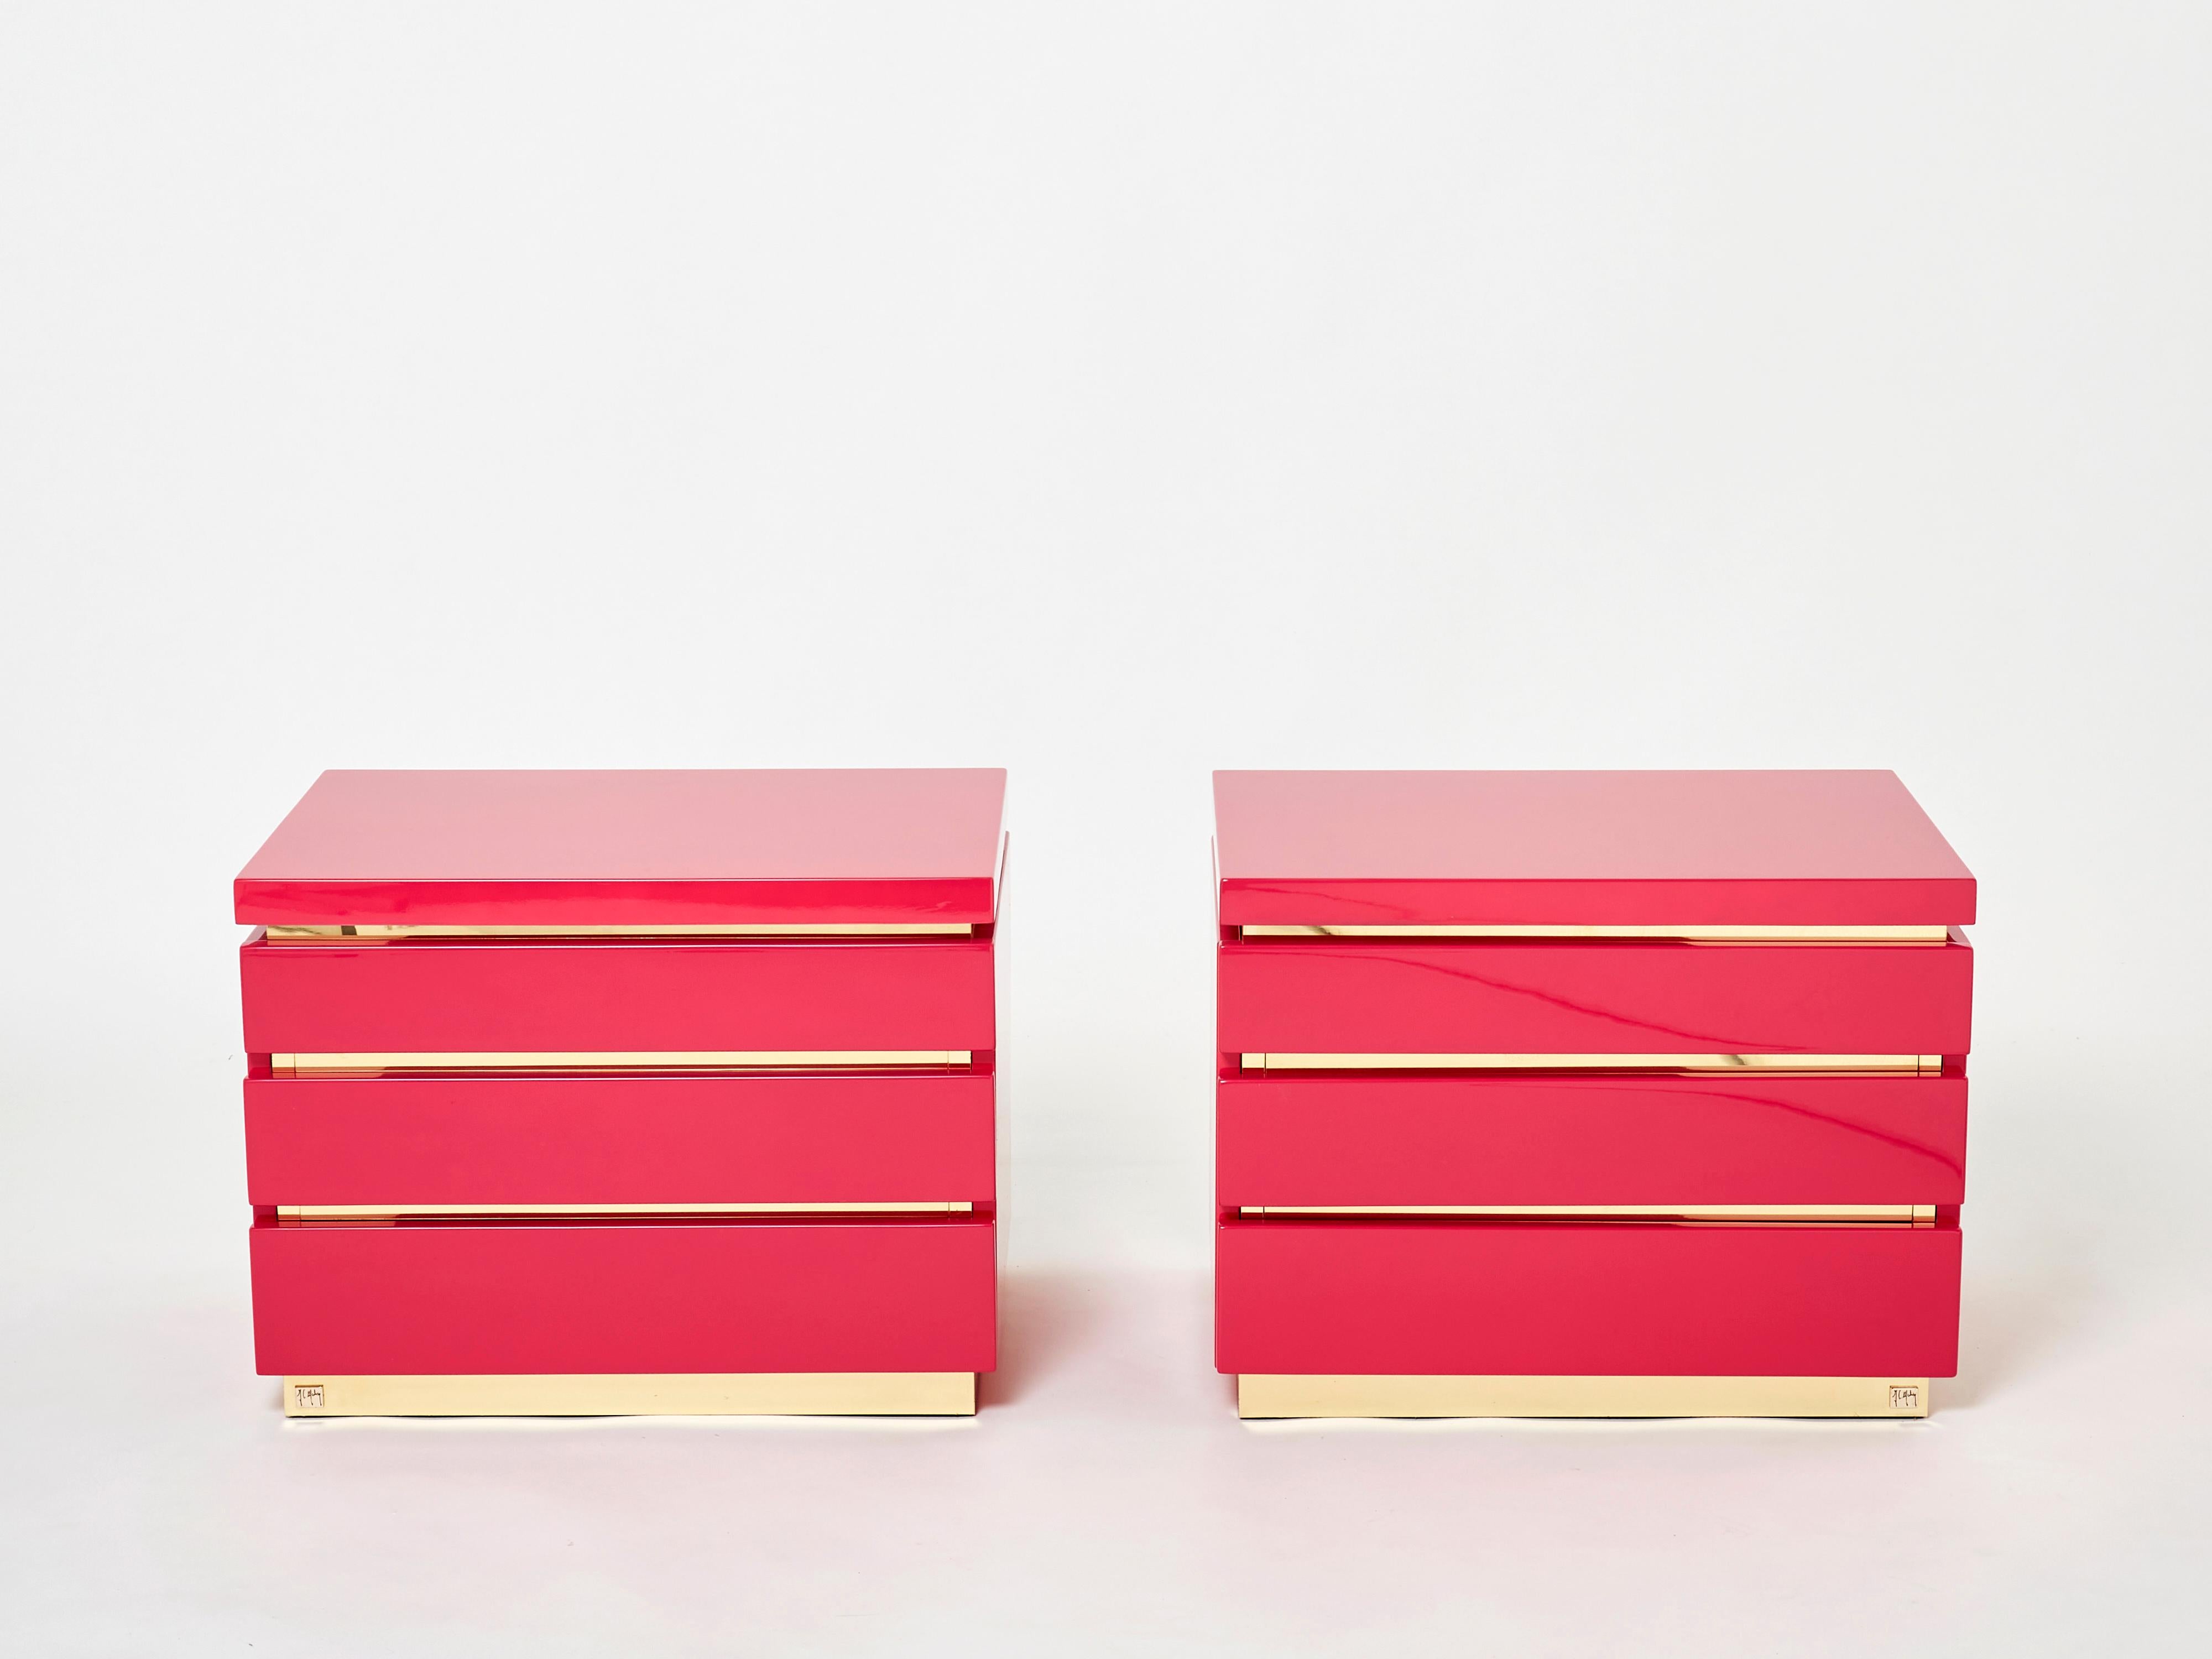 With a shining magenta pink lacquer finish, and brass standing and details between the three drawers, this beautiful pair of nightstands carries a stellar French mid-century aesthetic into the contemporary home. Its boxy yet sophisticated style is